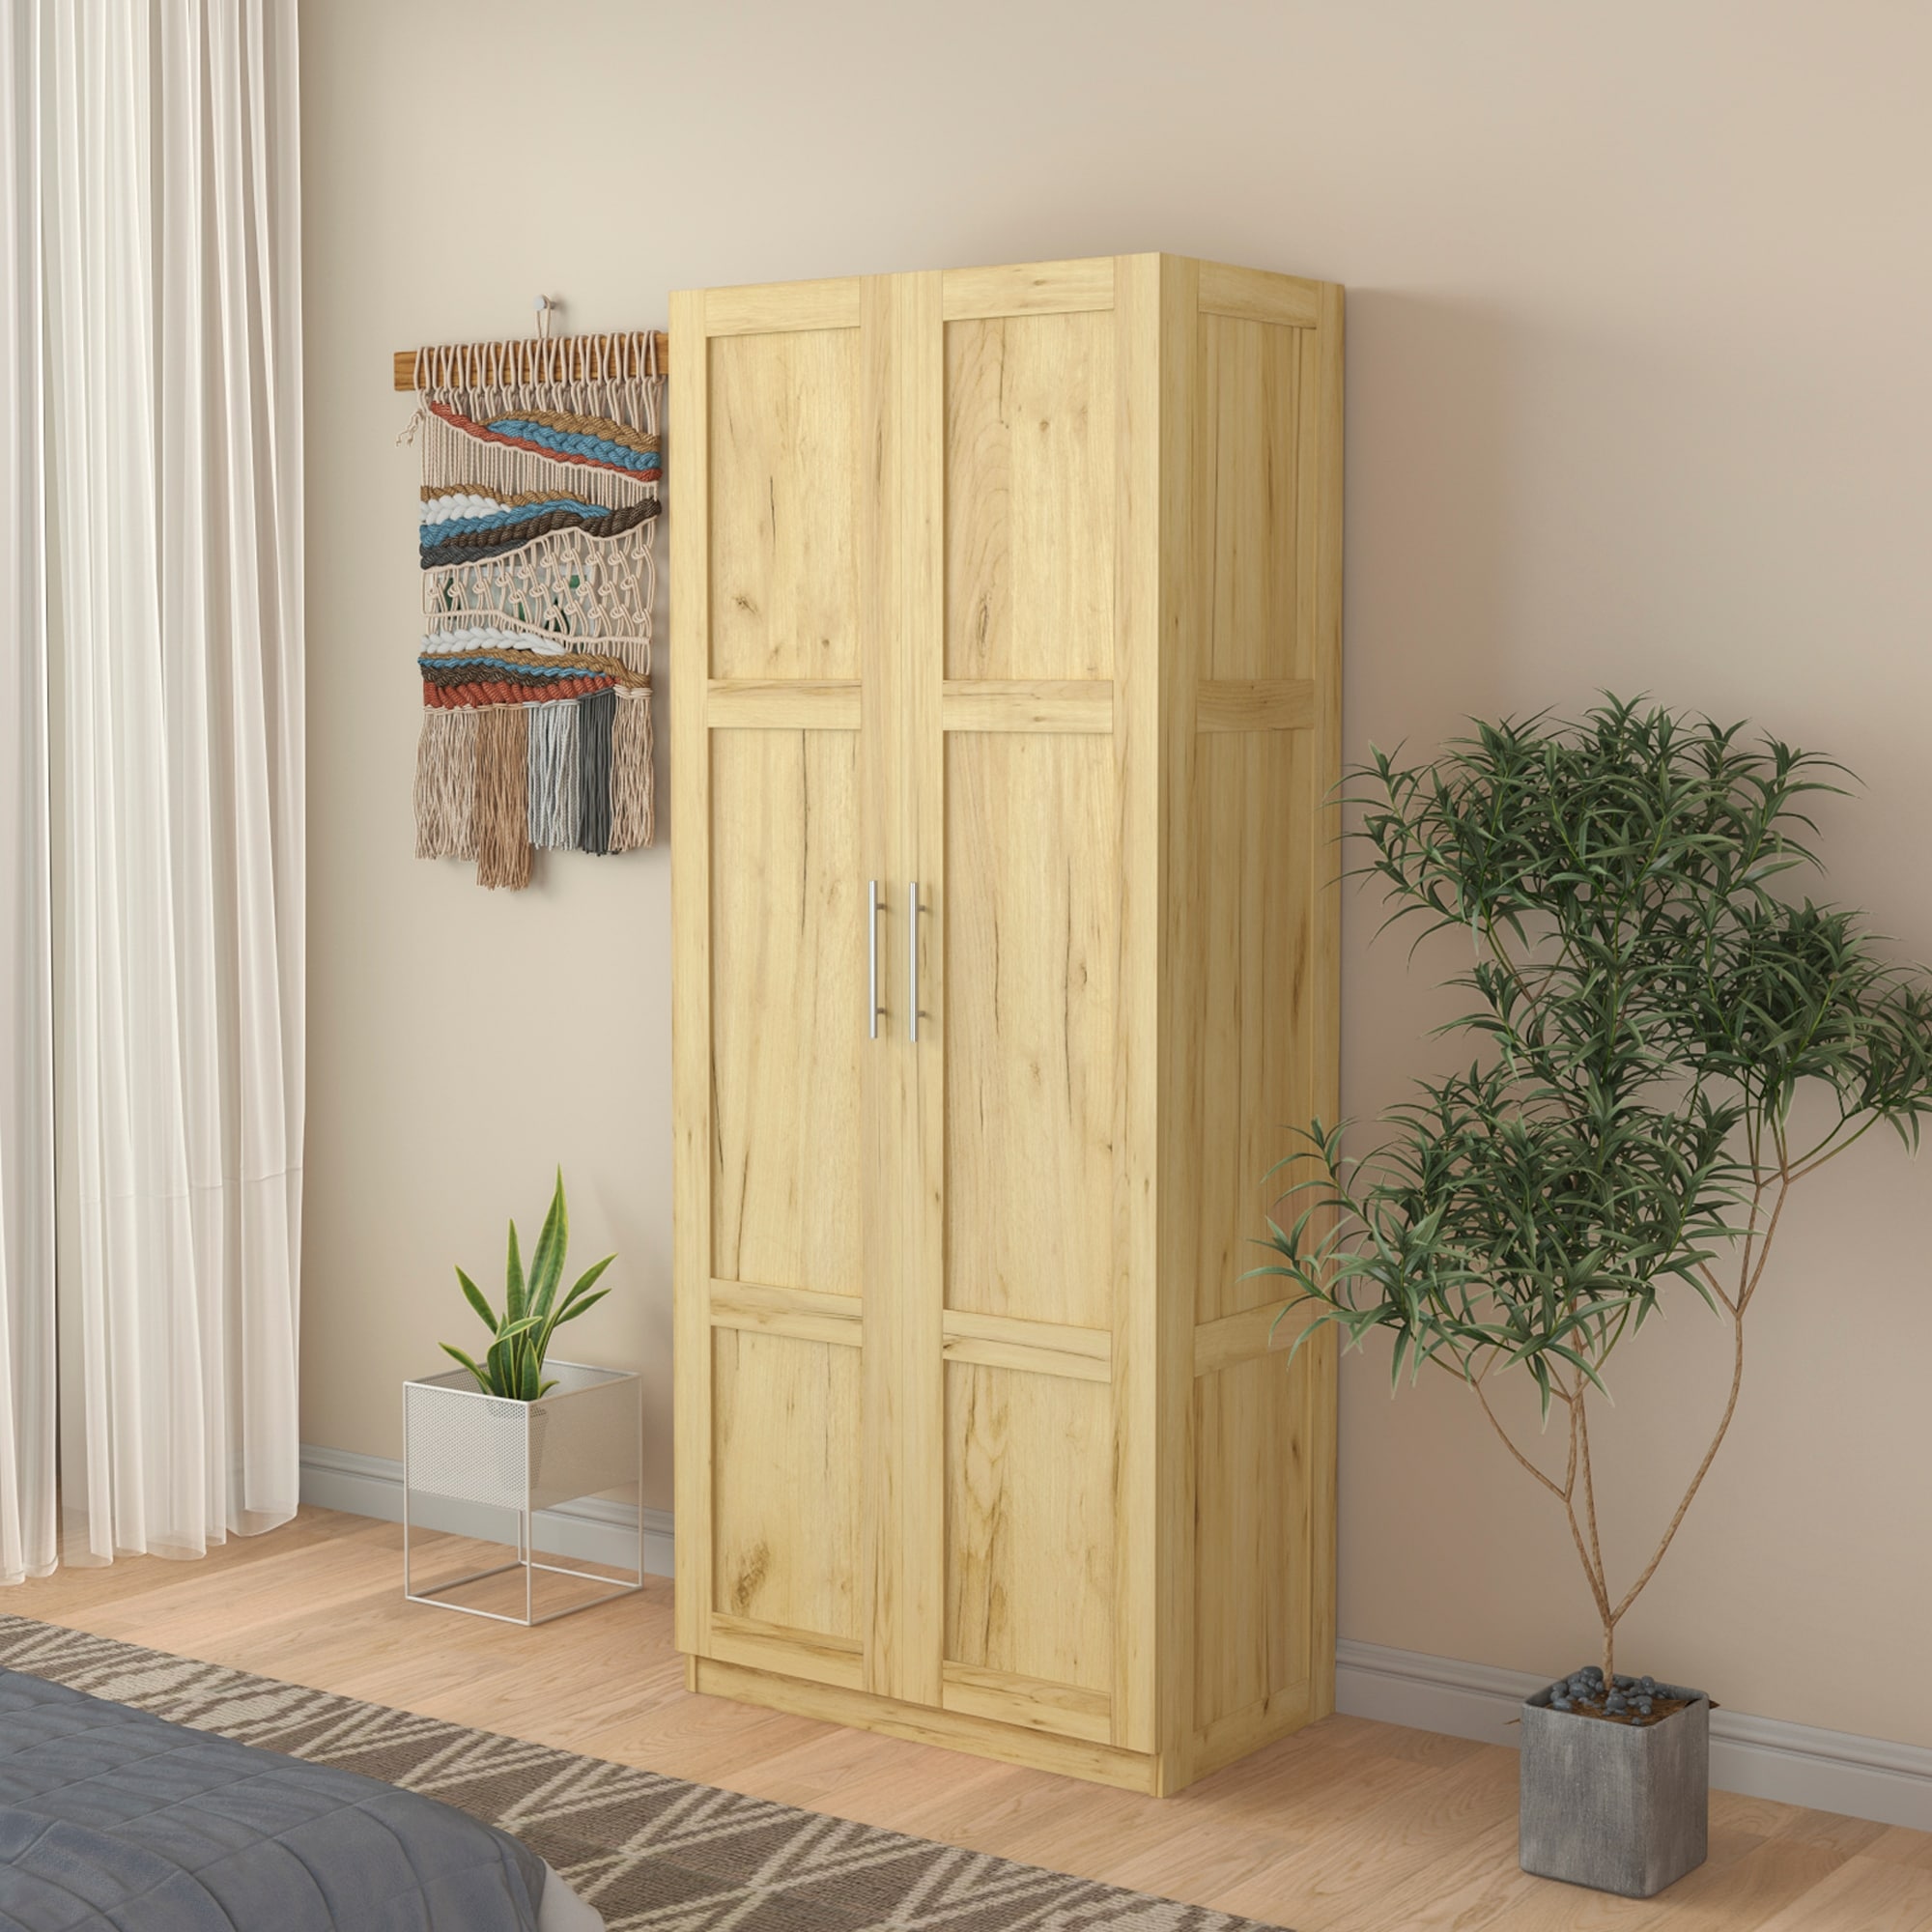 https://ak1.ostkcdn.com/images/products/is/images/direct/8c1c9f78cebca7e6bdf2250f411146f5d90ff01c/Modern-High-Wardrobe-Cabinet-with-2-Doors-and-3-Partitions.jpg